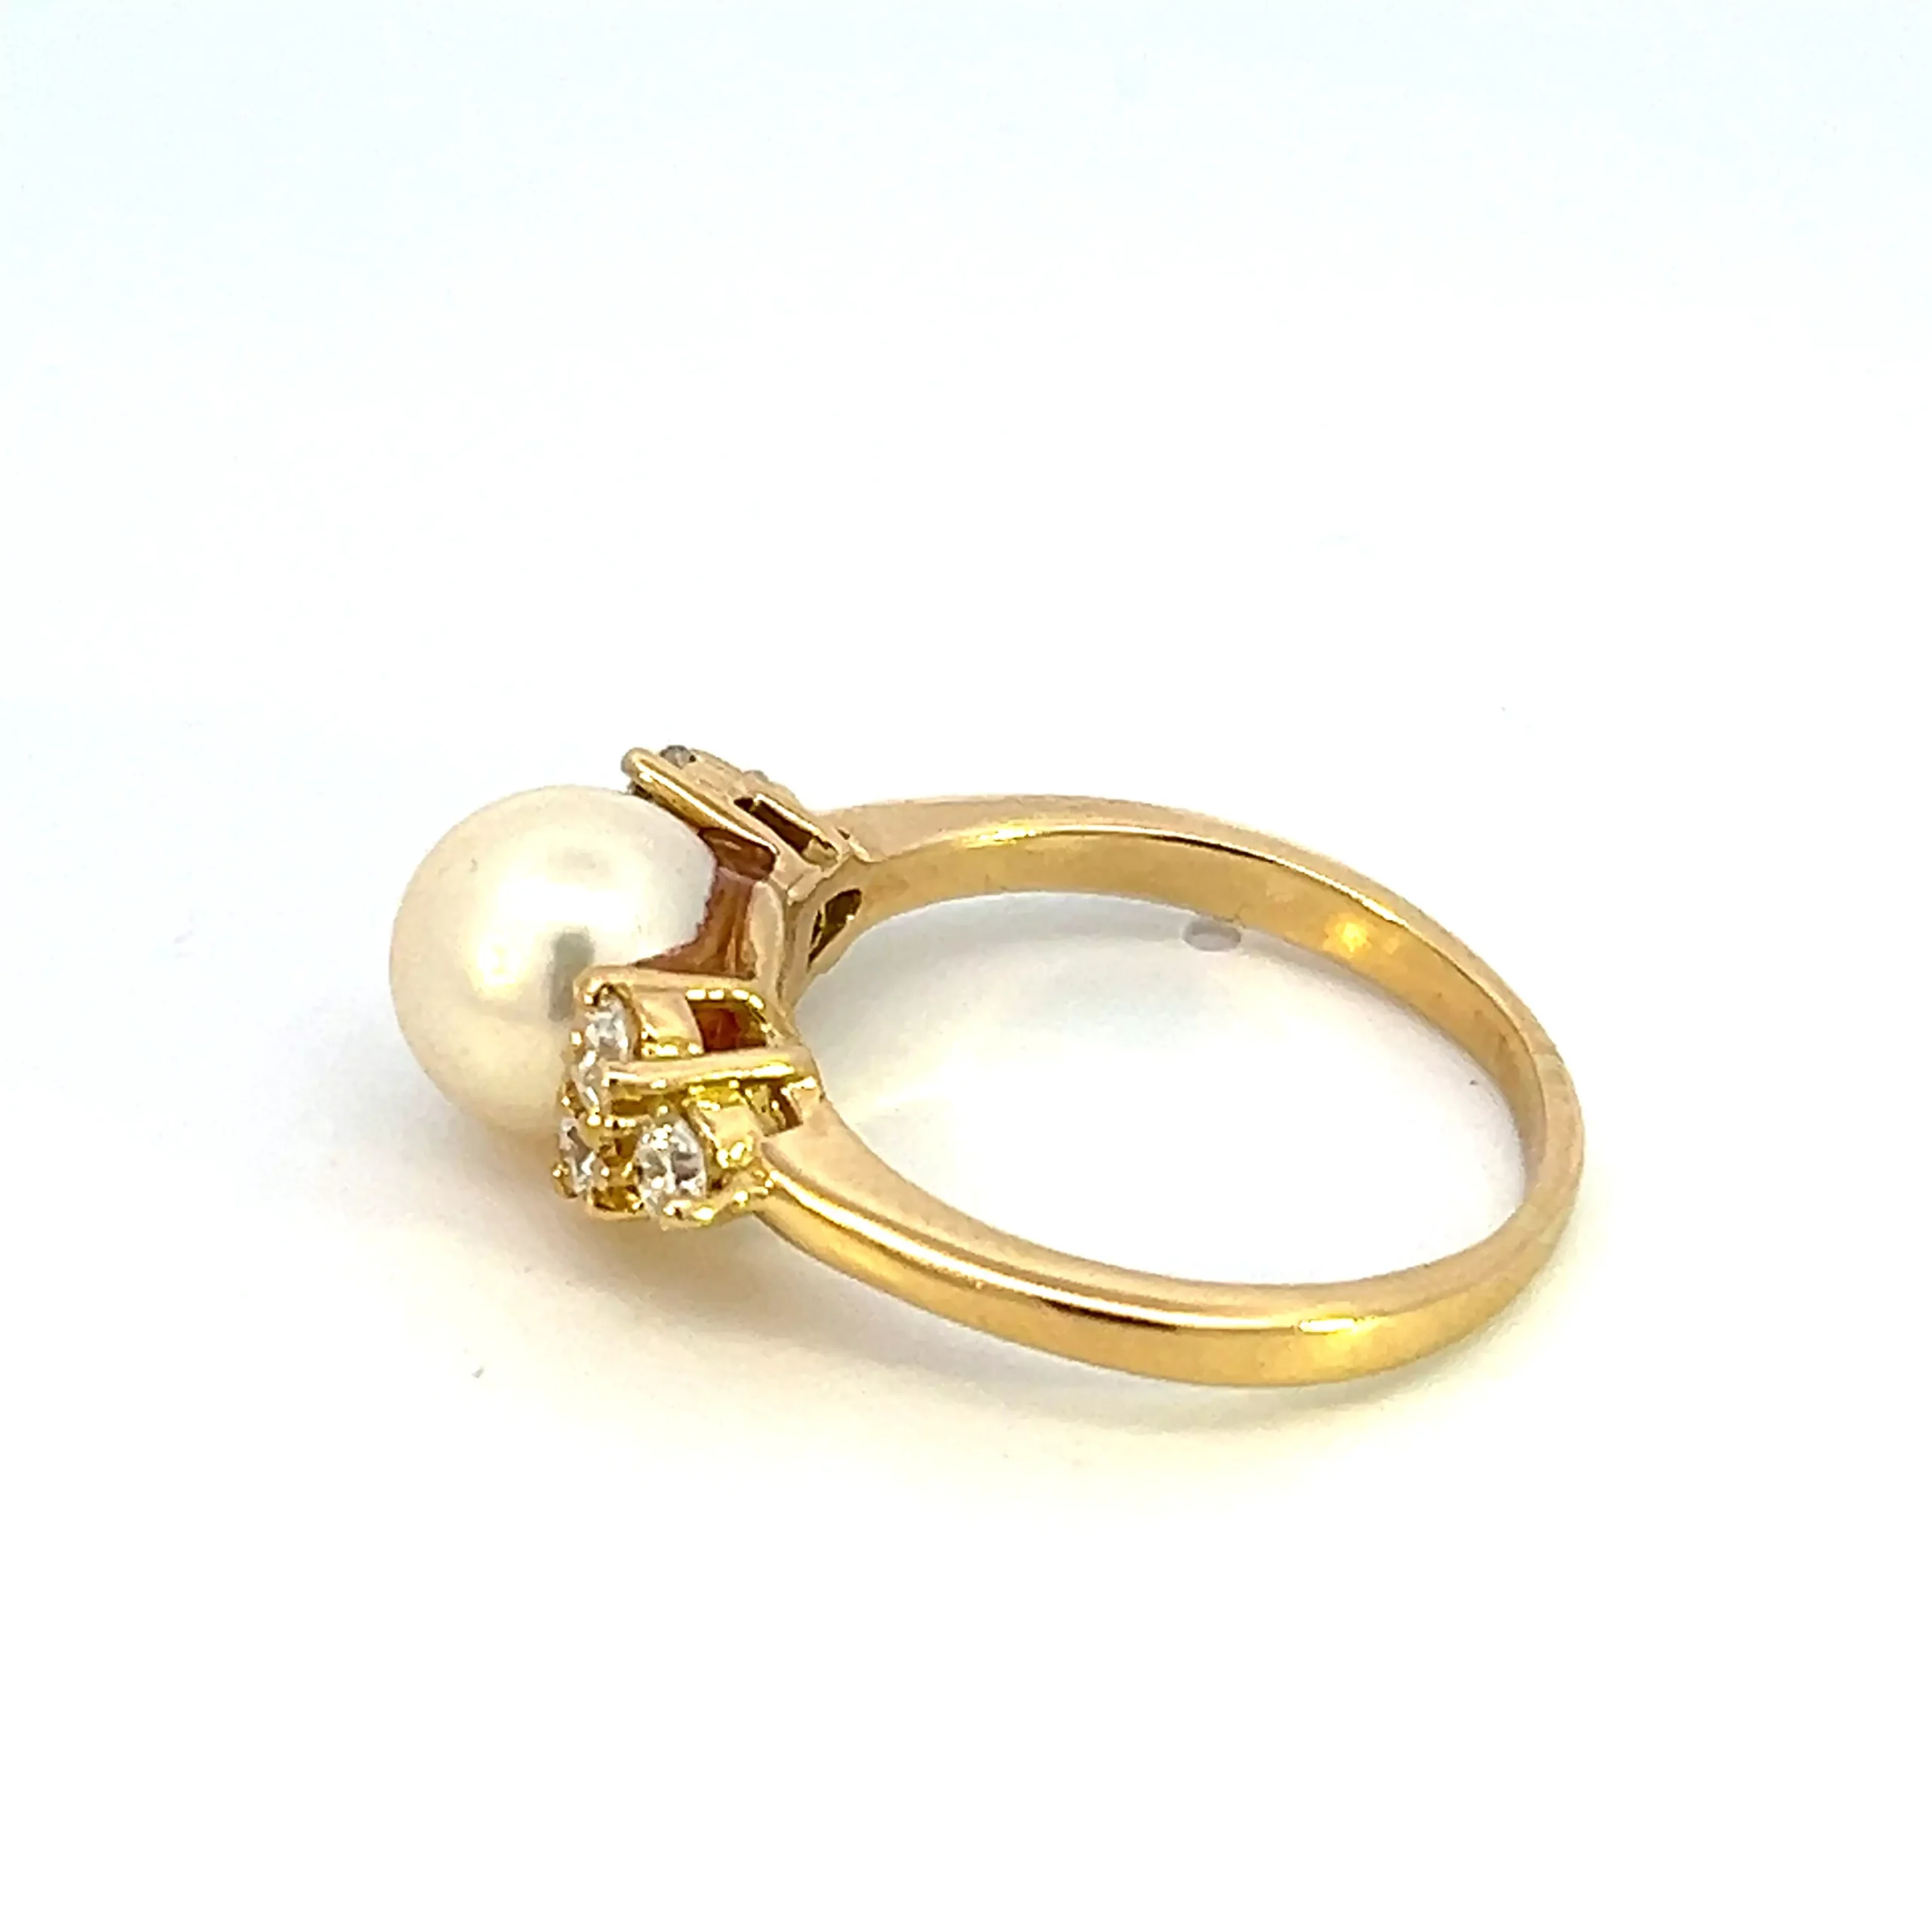 One estate 18 karat yellow ring with a 8.5mm cream-colored cultured pearl with 6 round brilliant-cut diamonds weighing 0.50 carat total weight in a cluster of 3 on each side of the pearl